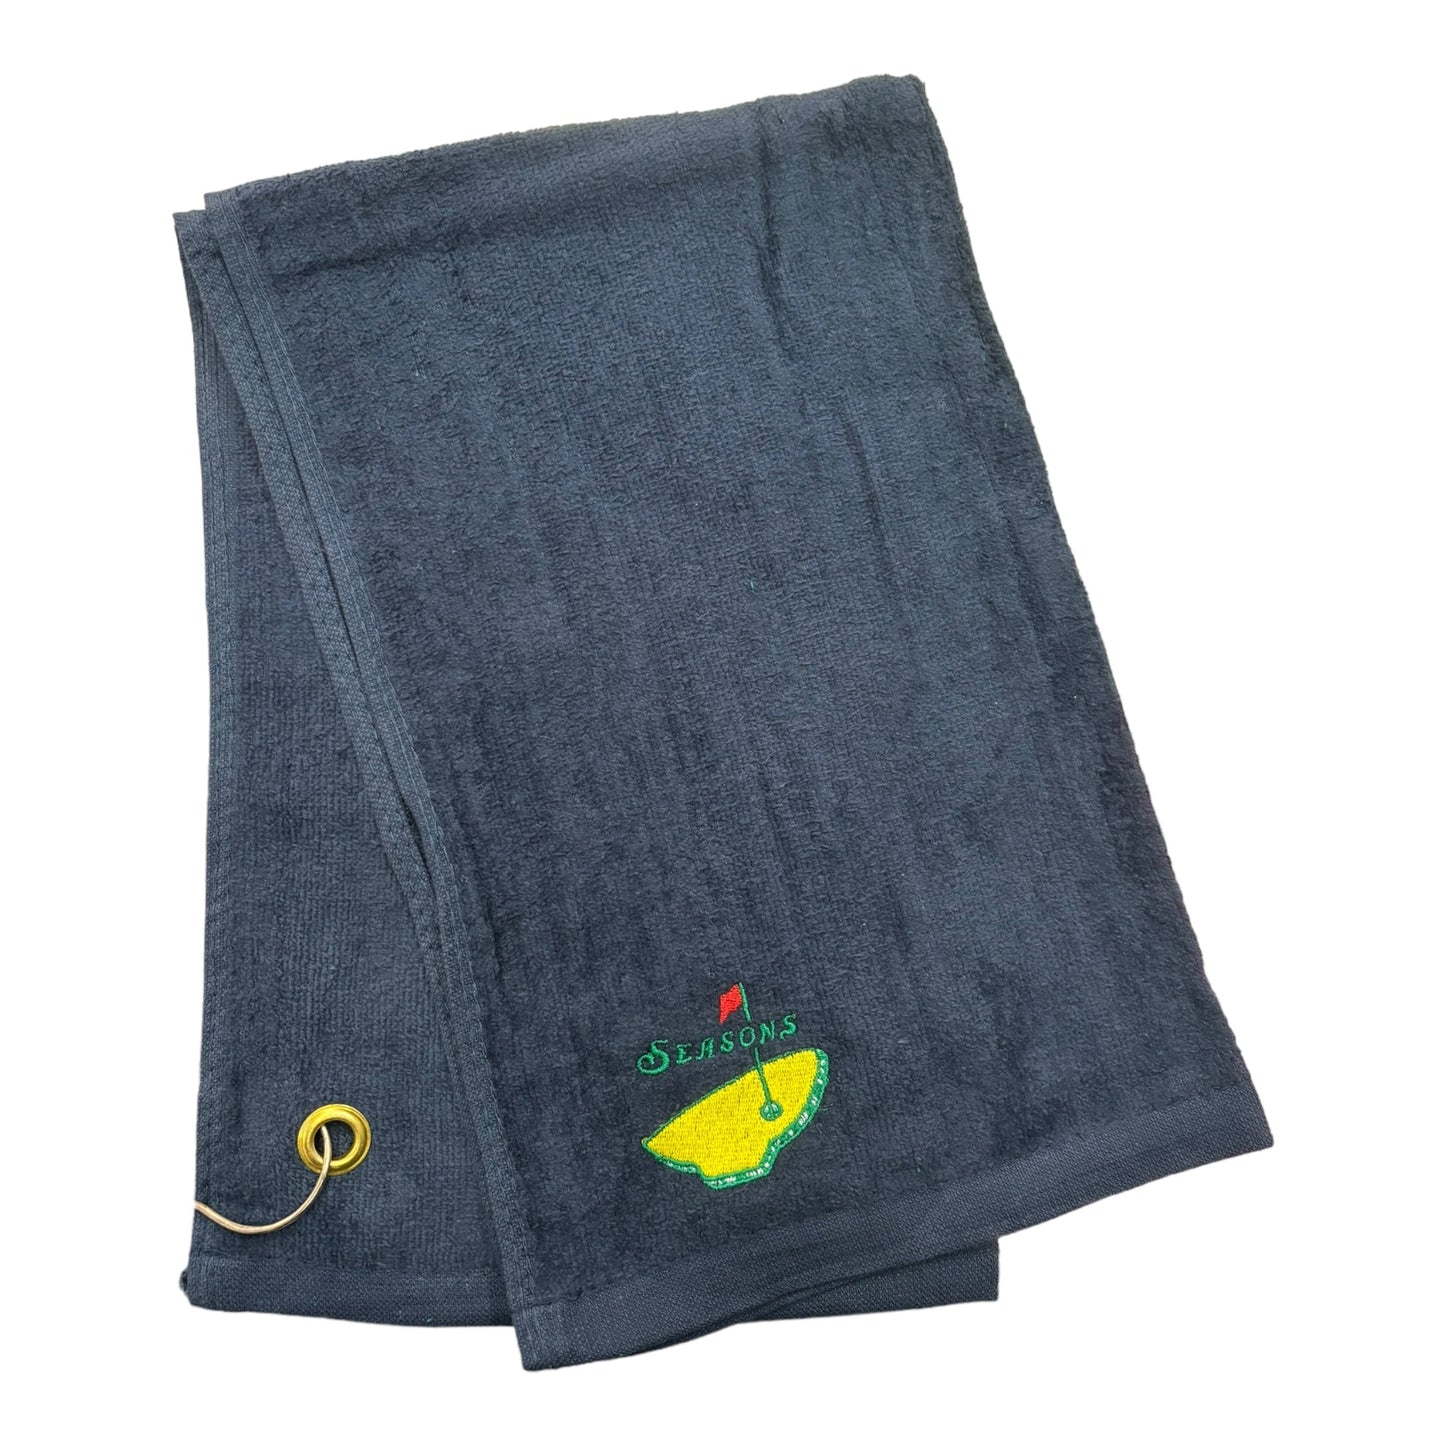 Navy Golf Towel with Embroidered NYS Egg Logo Embroidered on it.